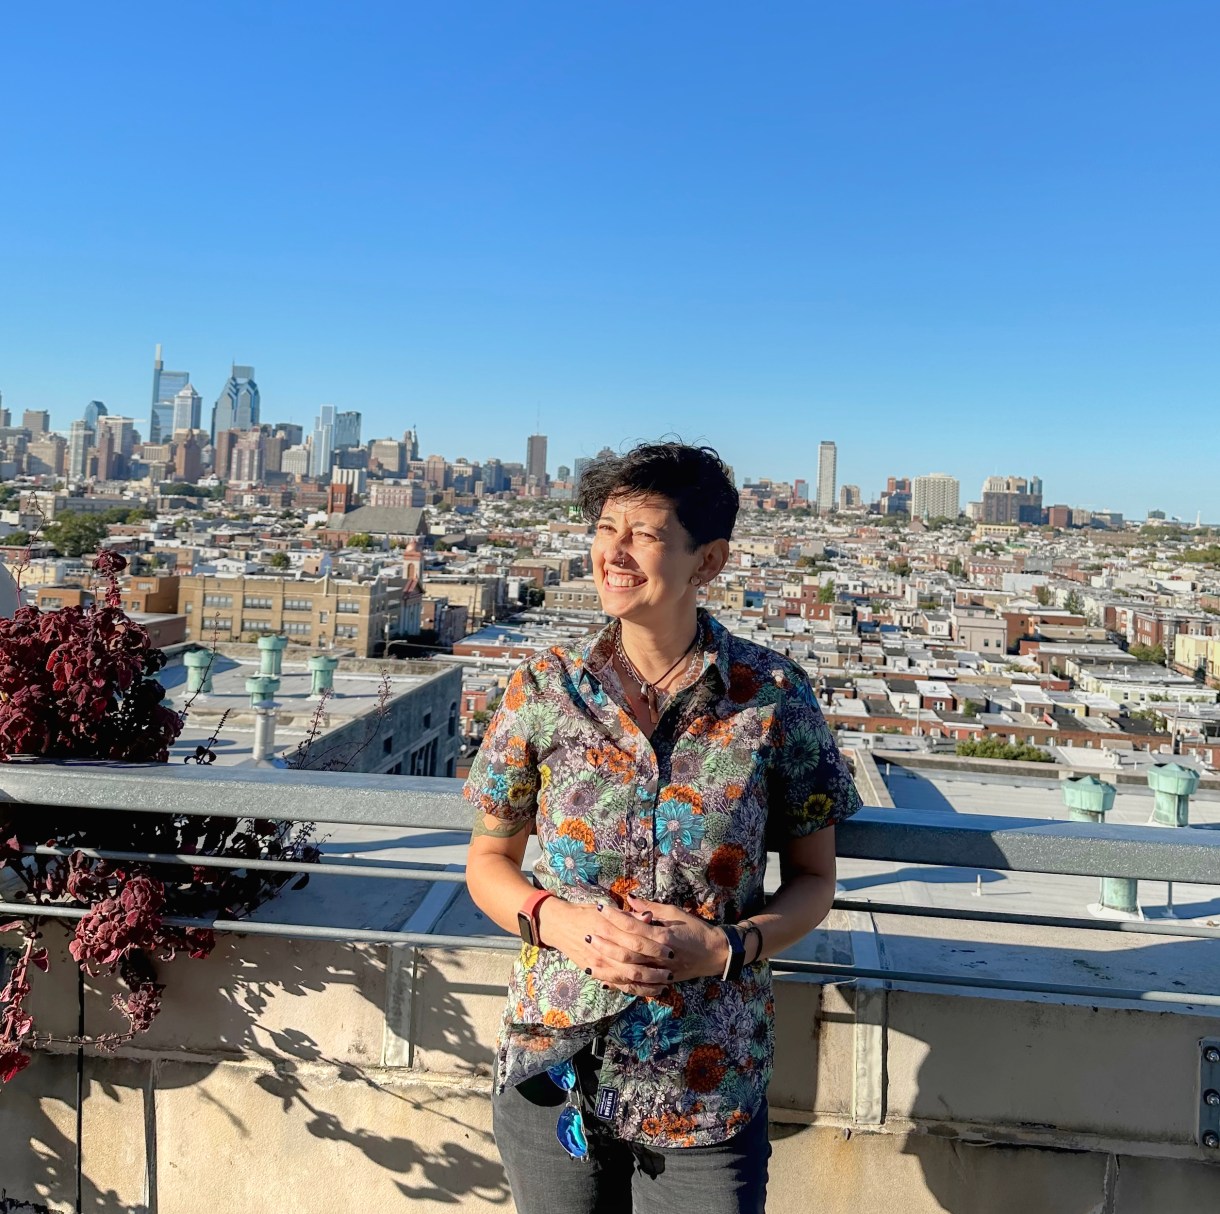 tracy stands, grinning, on a rooftop with Philadelphia in the back. she is an Asian woman wearing a colorful button up and orange wrist watch and jeans